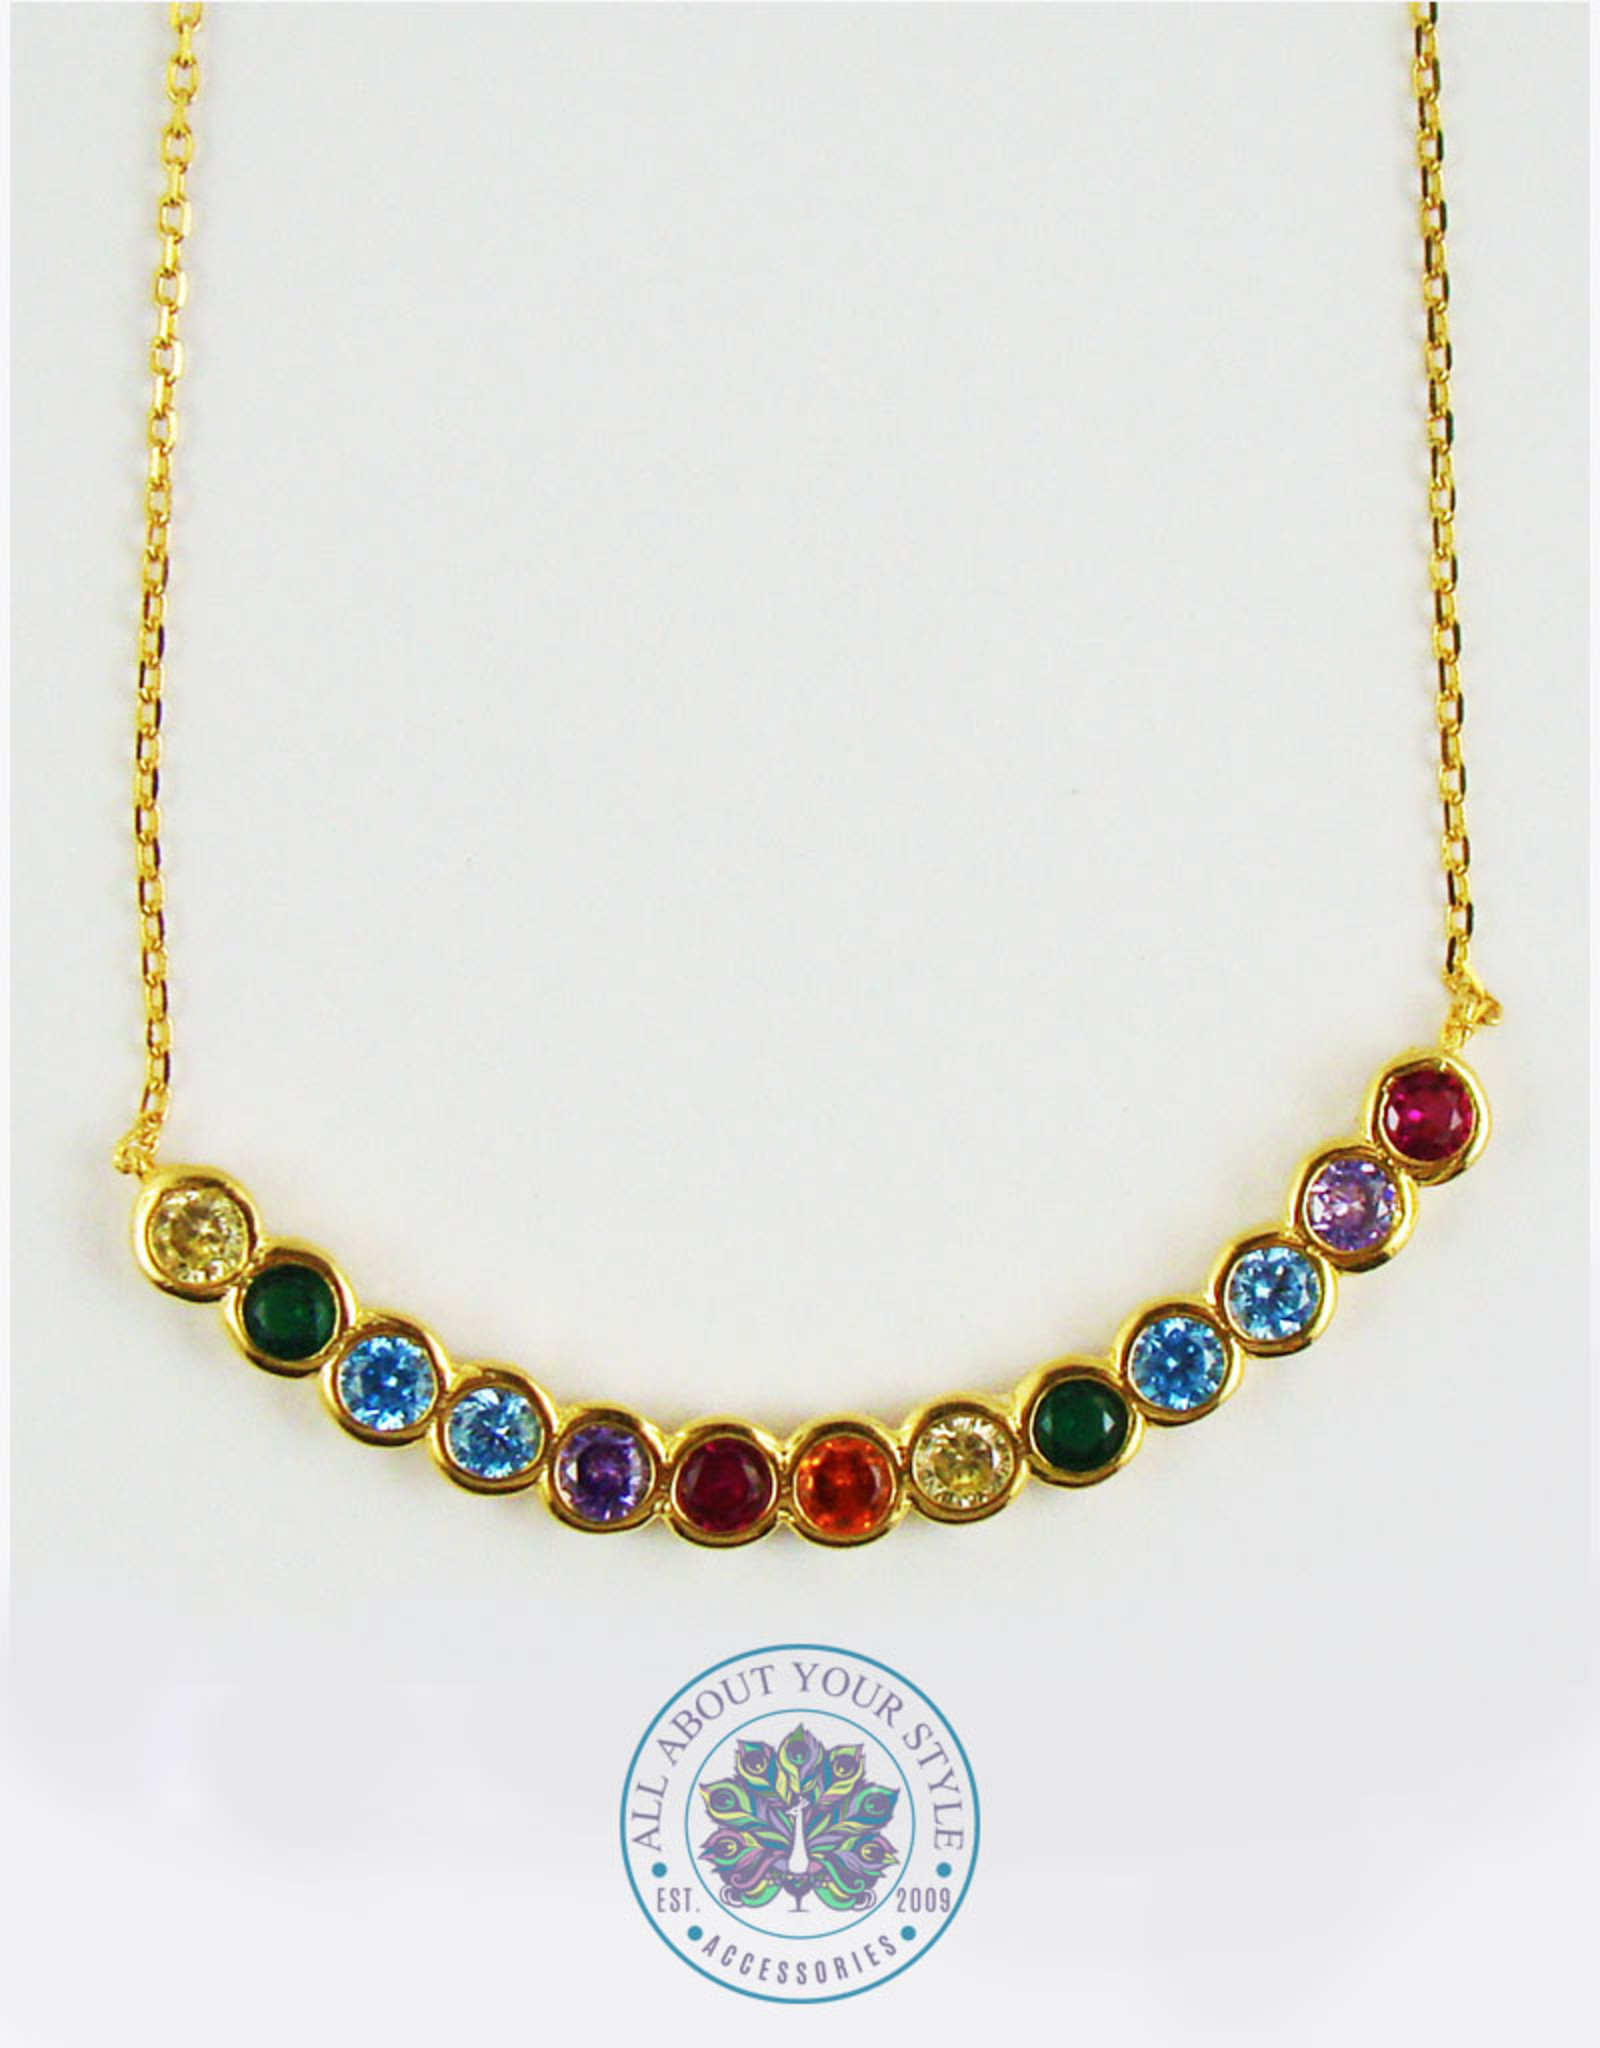 Rainbow Cubic Zircon Gold Plated Curved Bar Necklace - All About Your Style | Fashion Jewelry ...